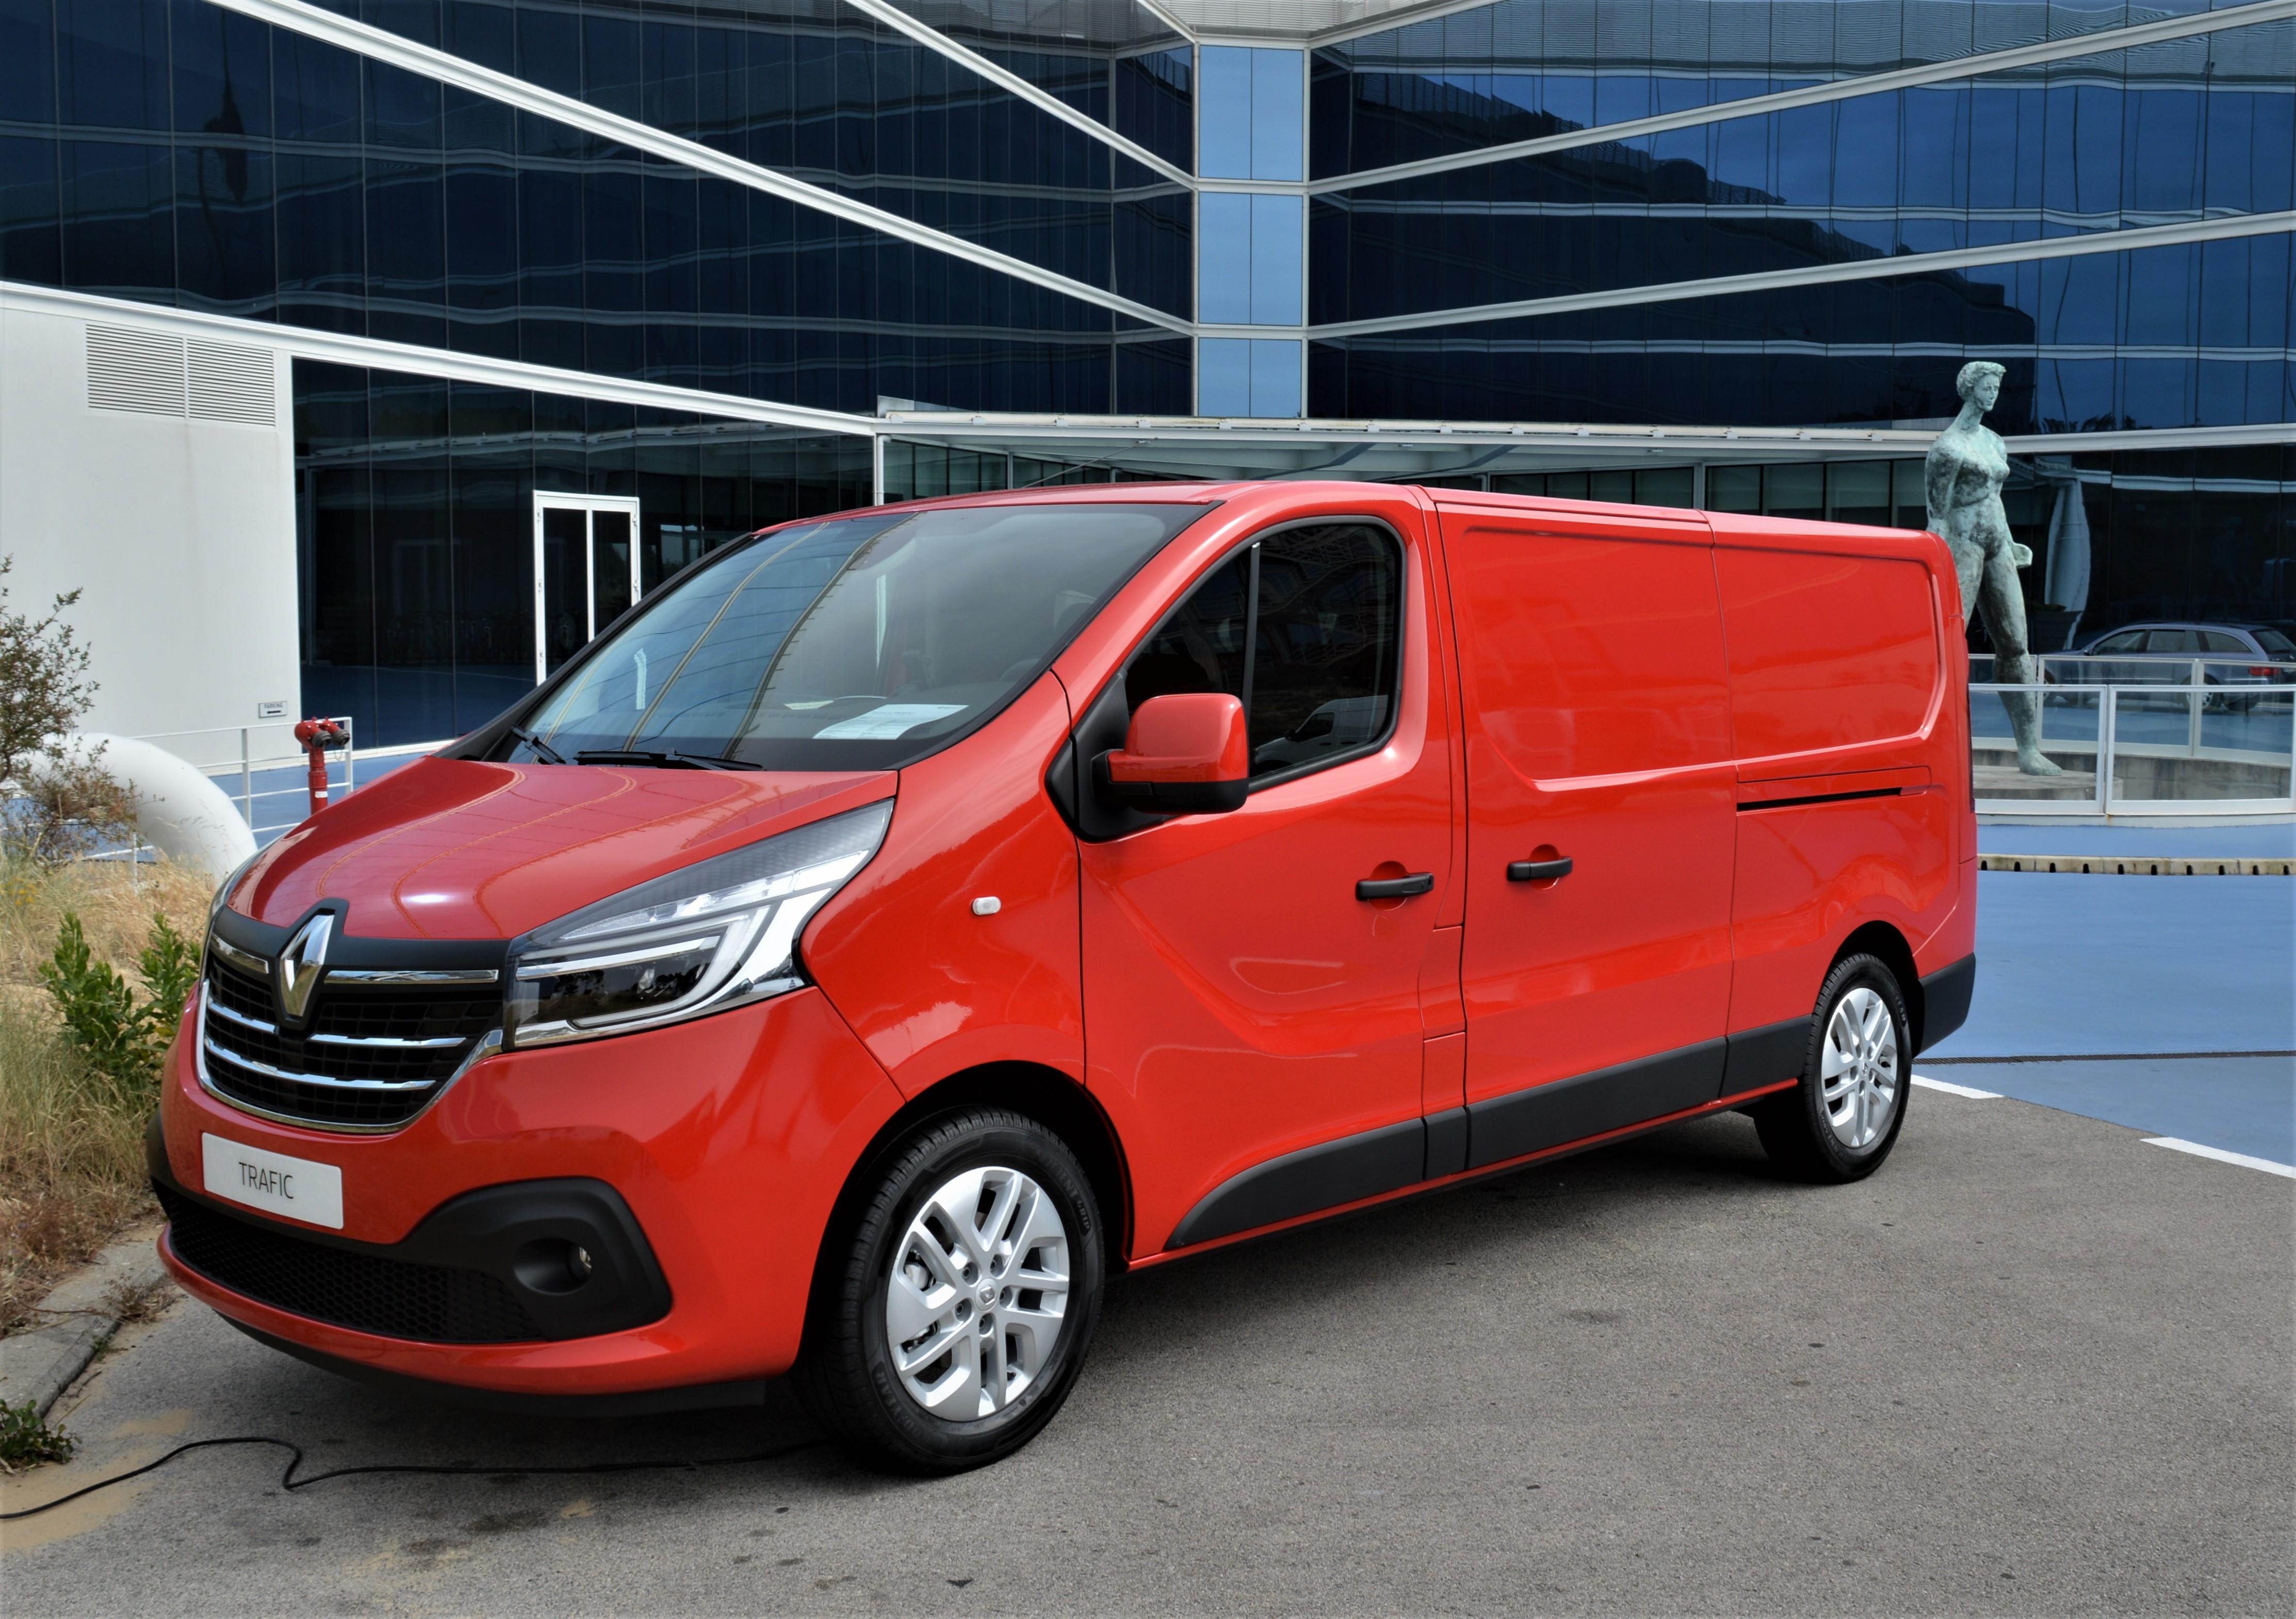 Renault Trafic exterior specifications